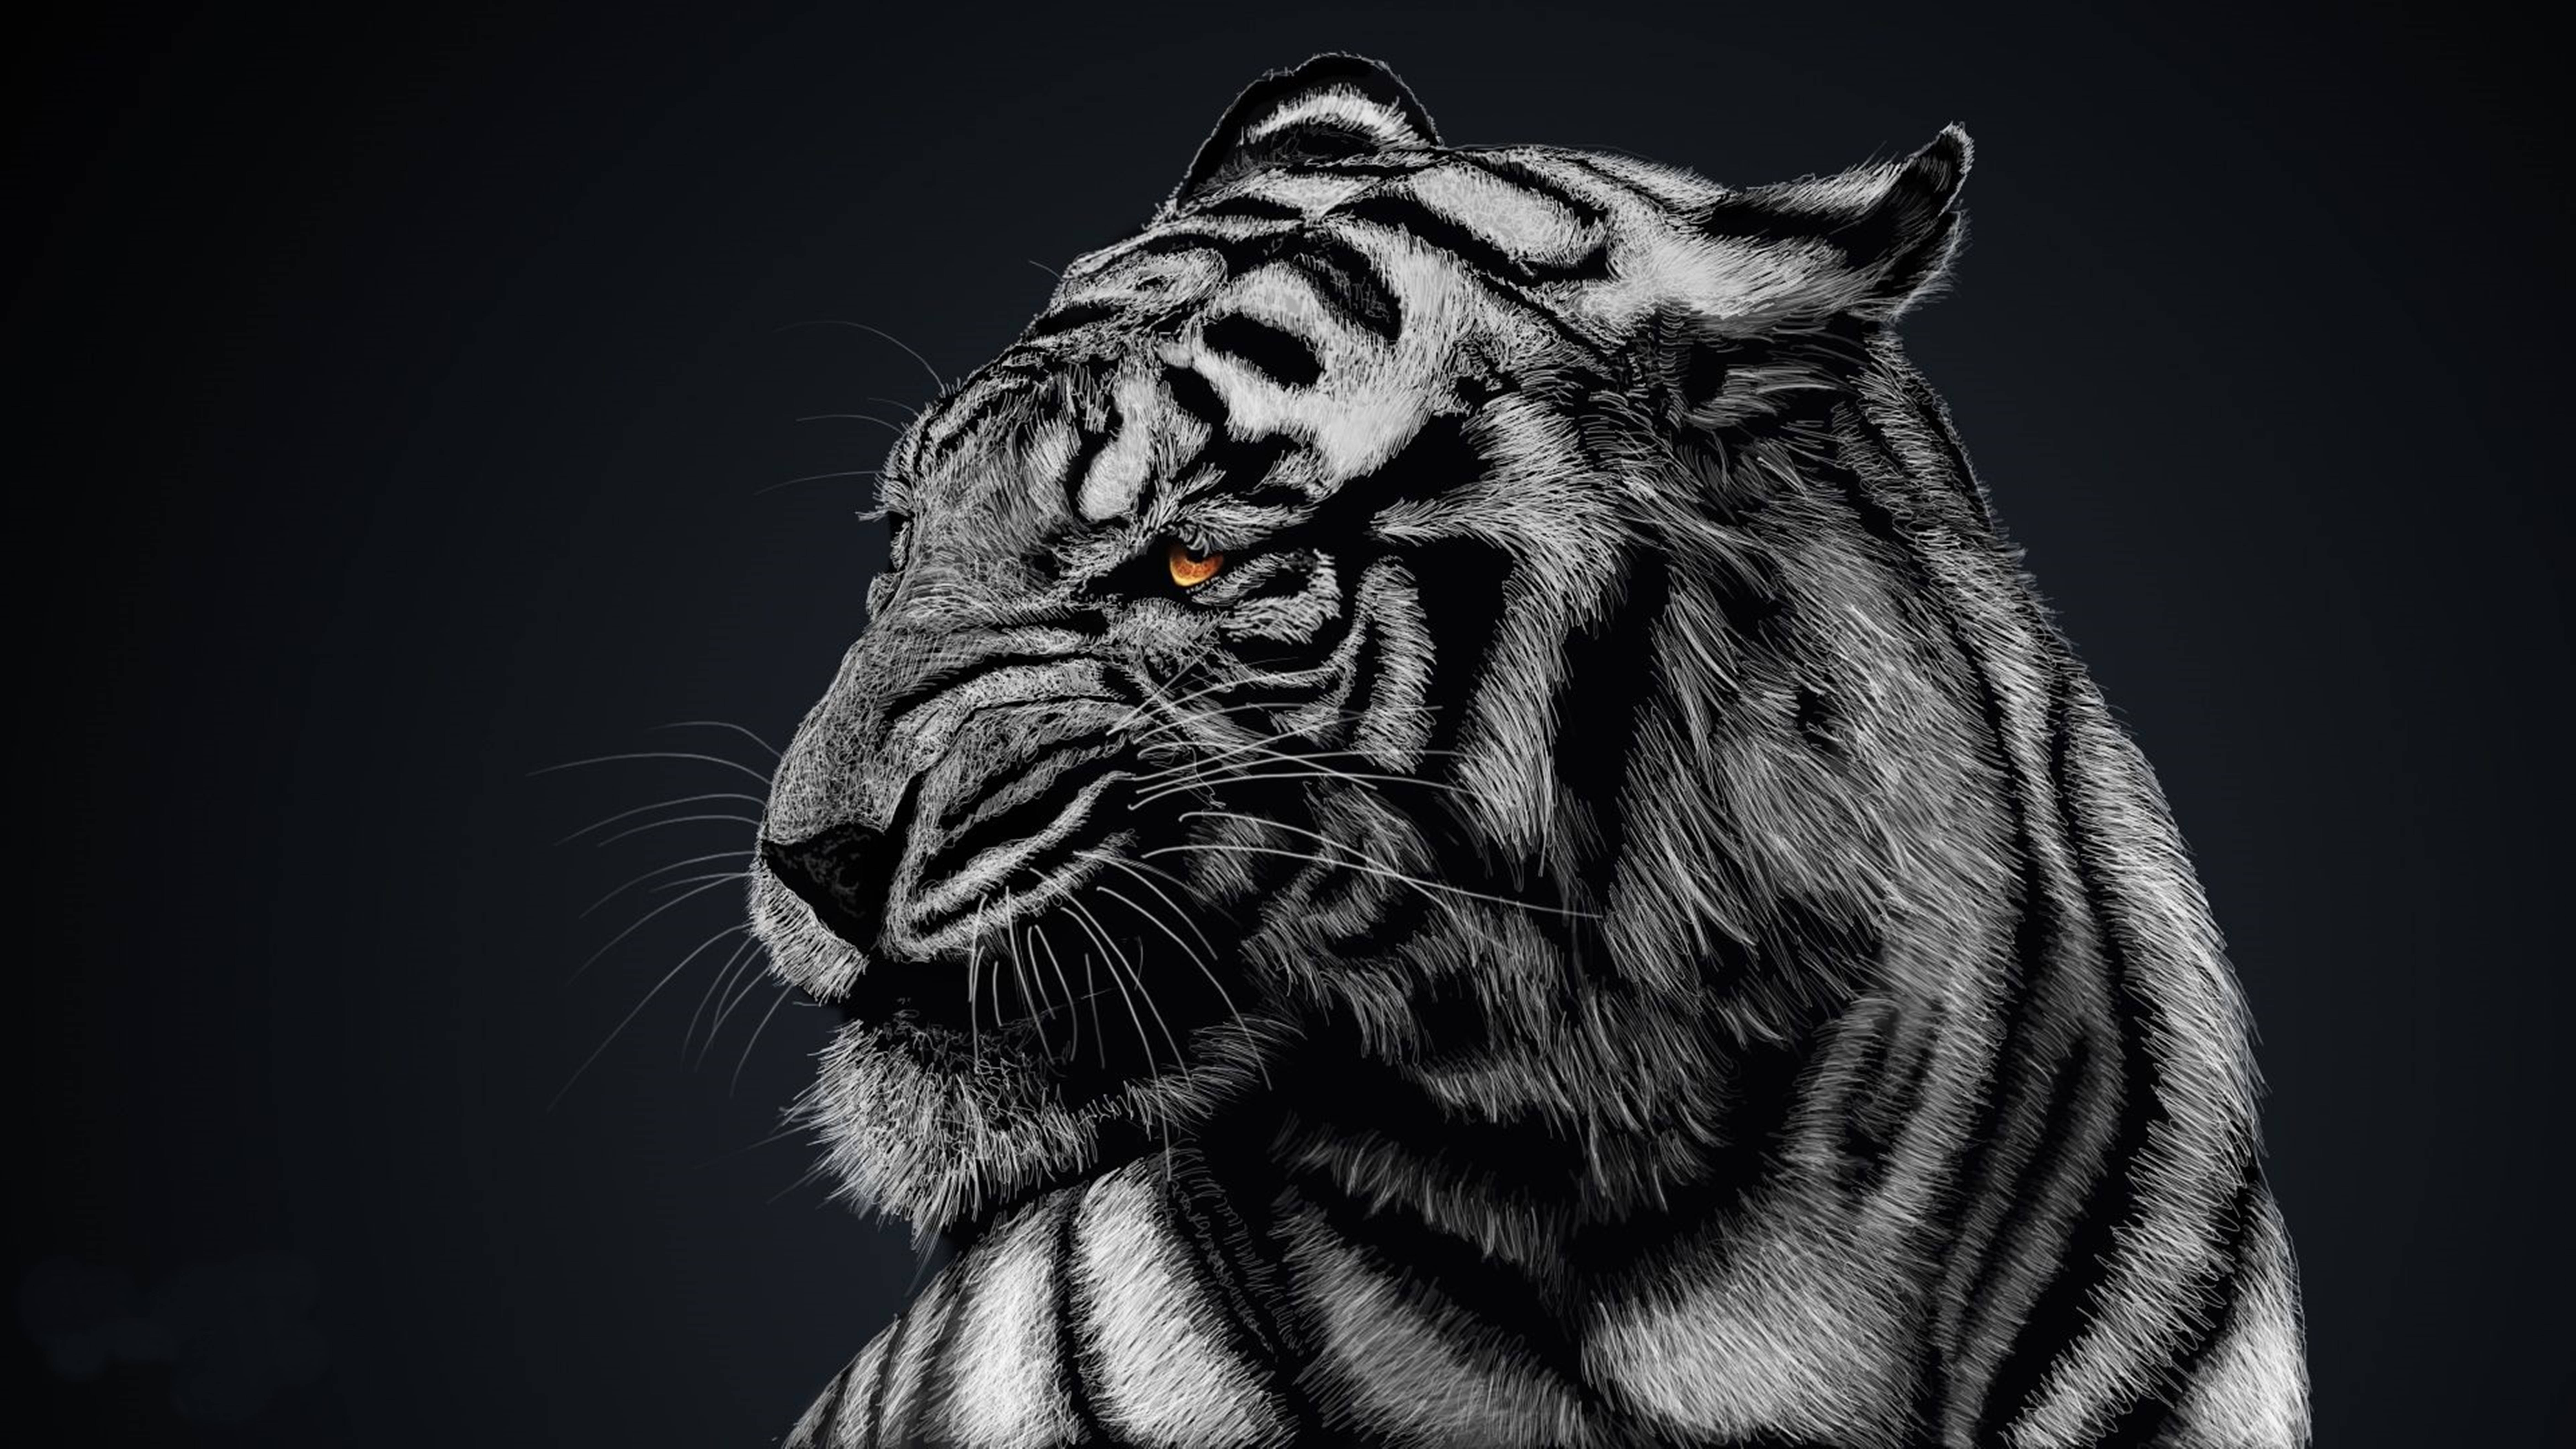 Majestic 8k Tiger In Ultra-high Definition Background